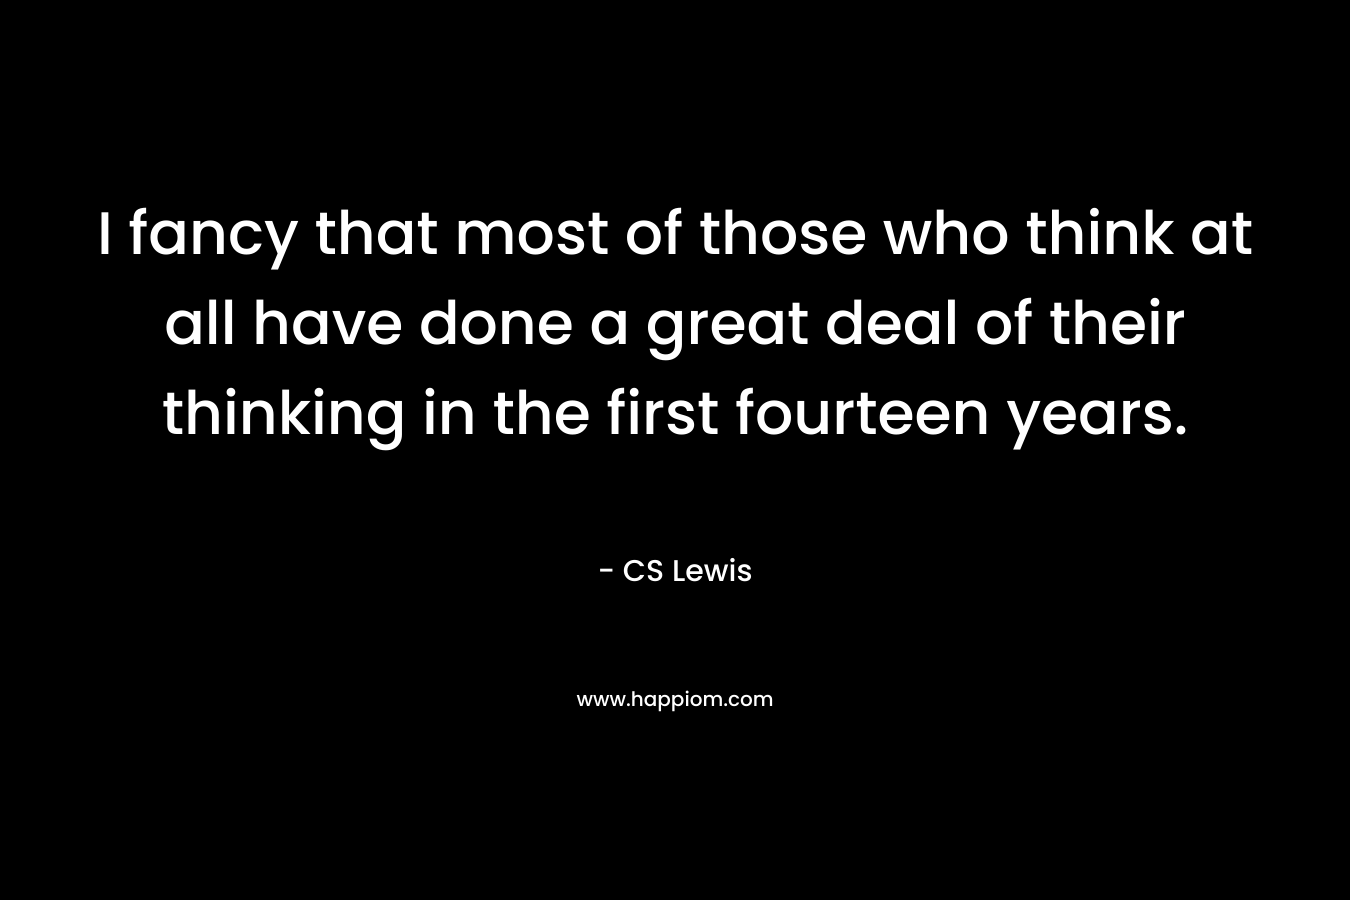 I fancy that most of those who think at all have done a great deal of their thinking in the first fourteen years. – CS Lewis